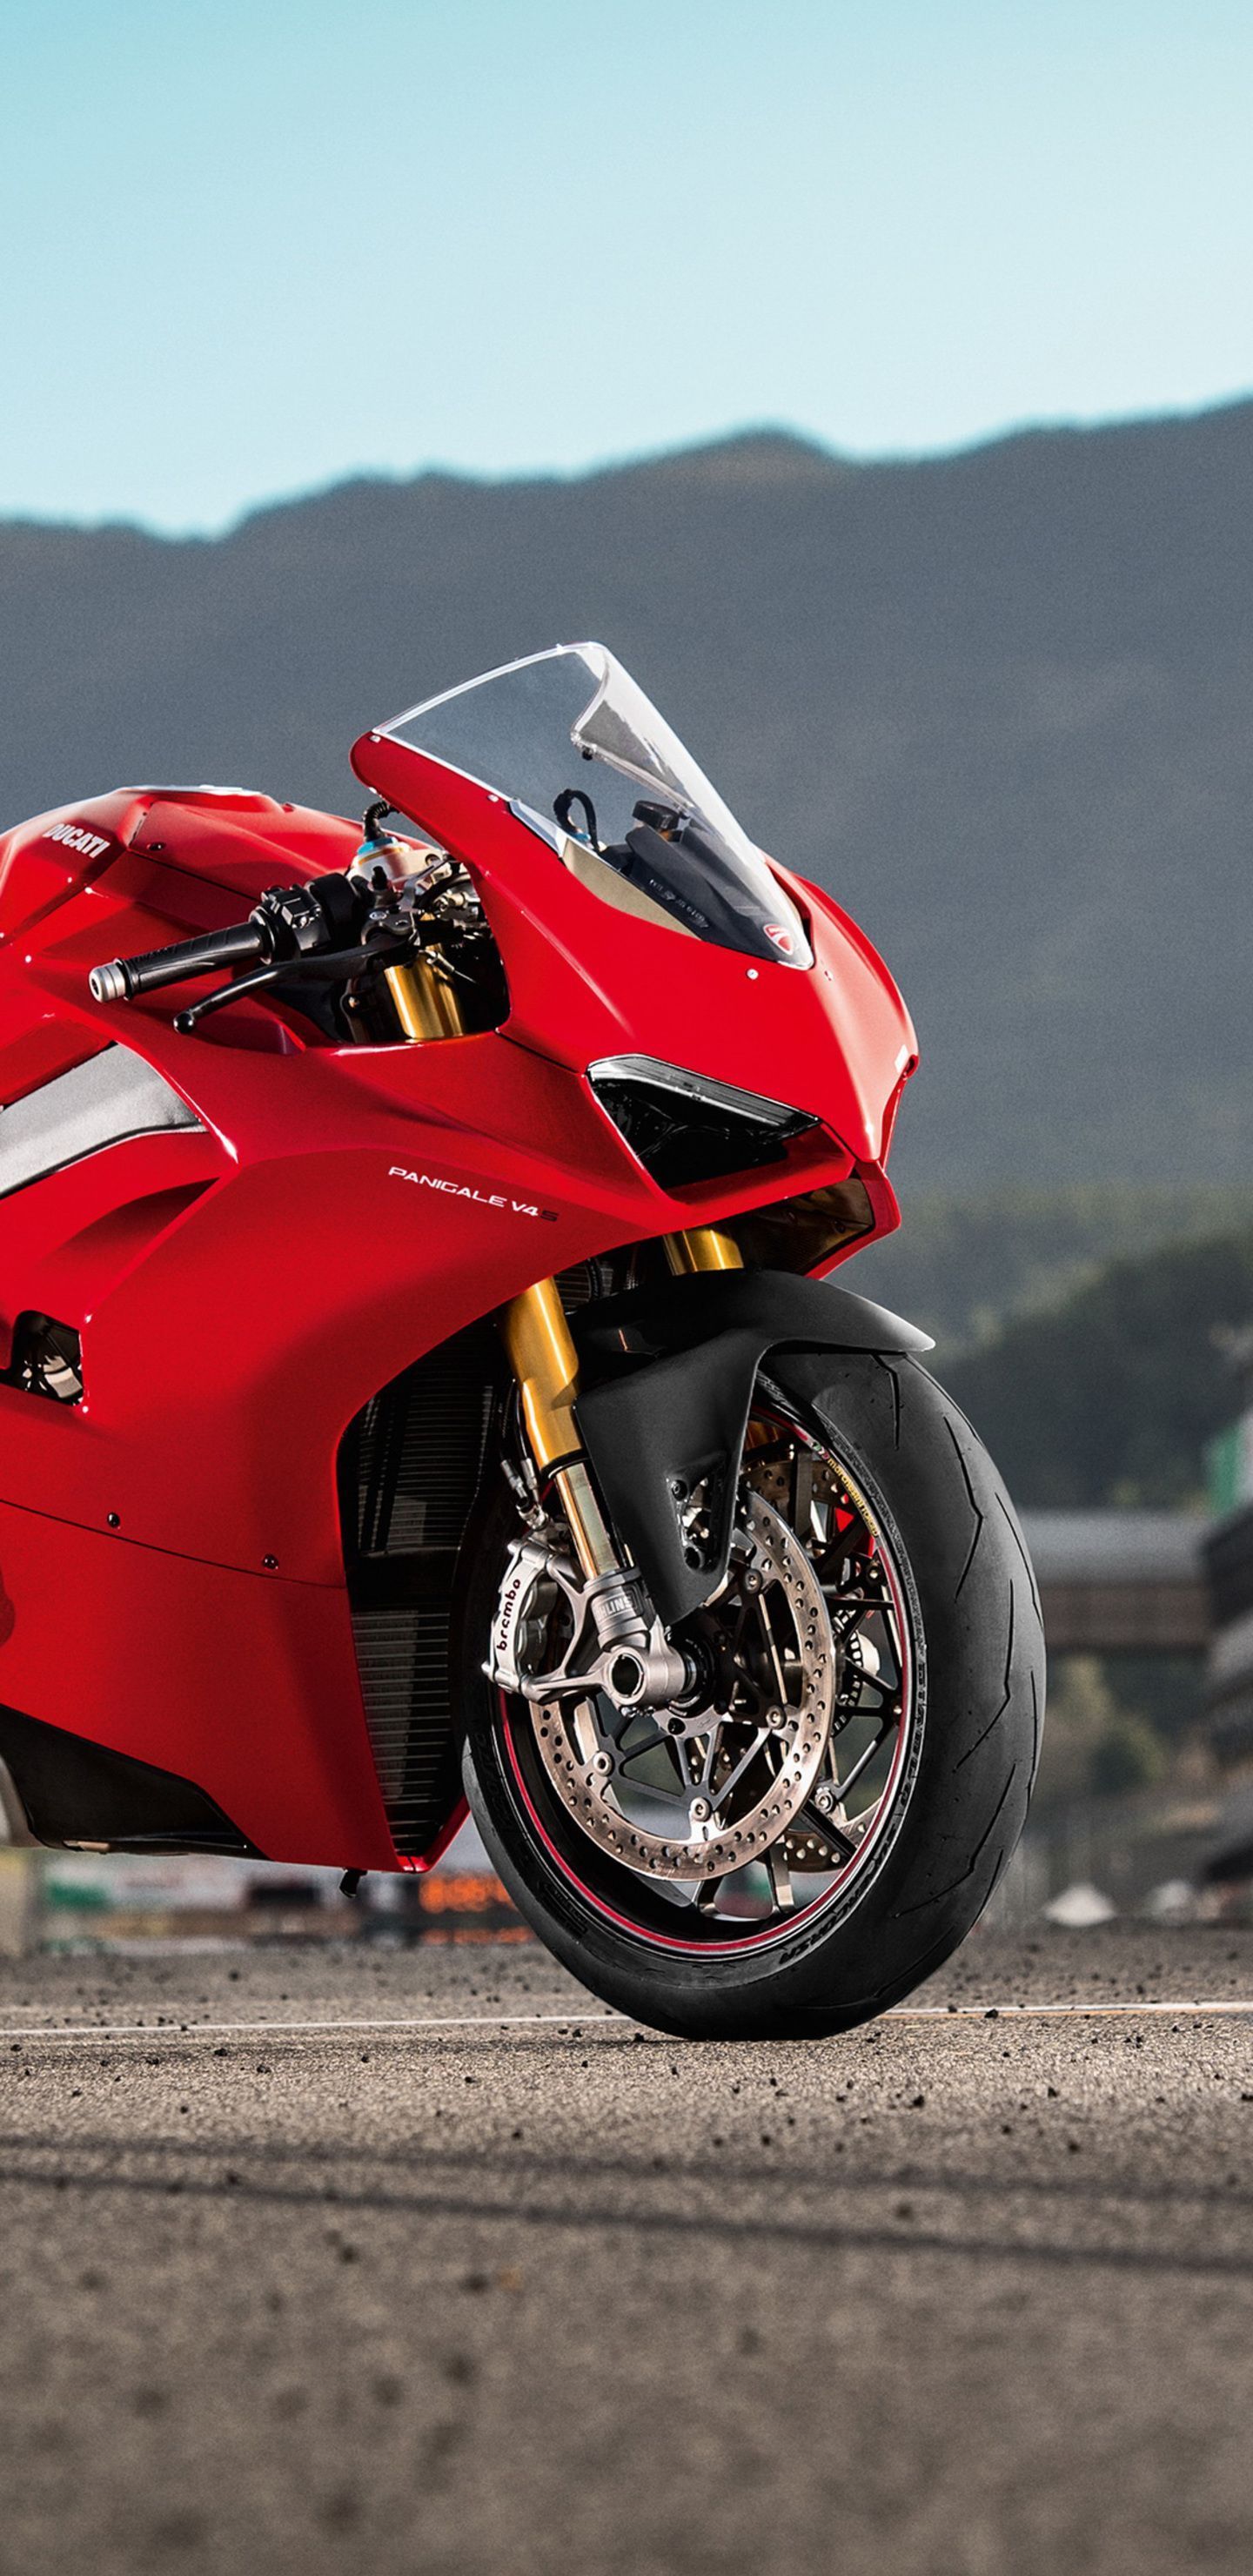 Panigale V4 Iphone Wallpapers Wallpaper Cave